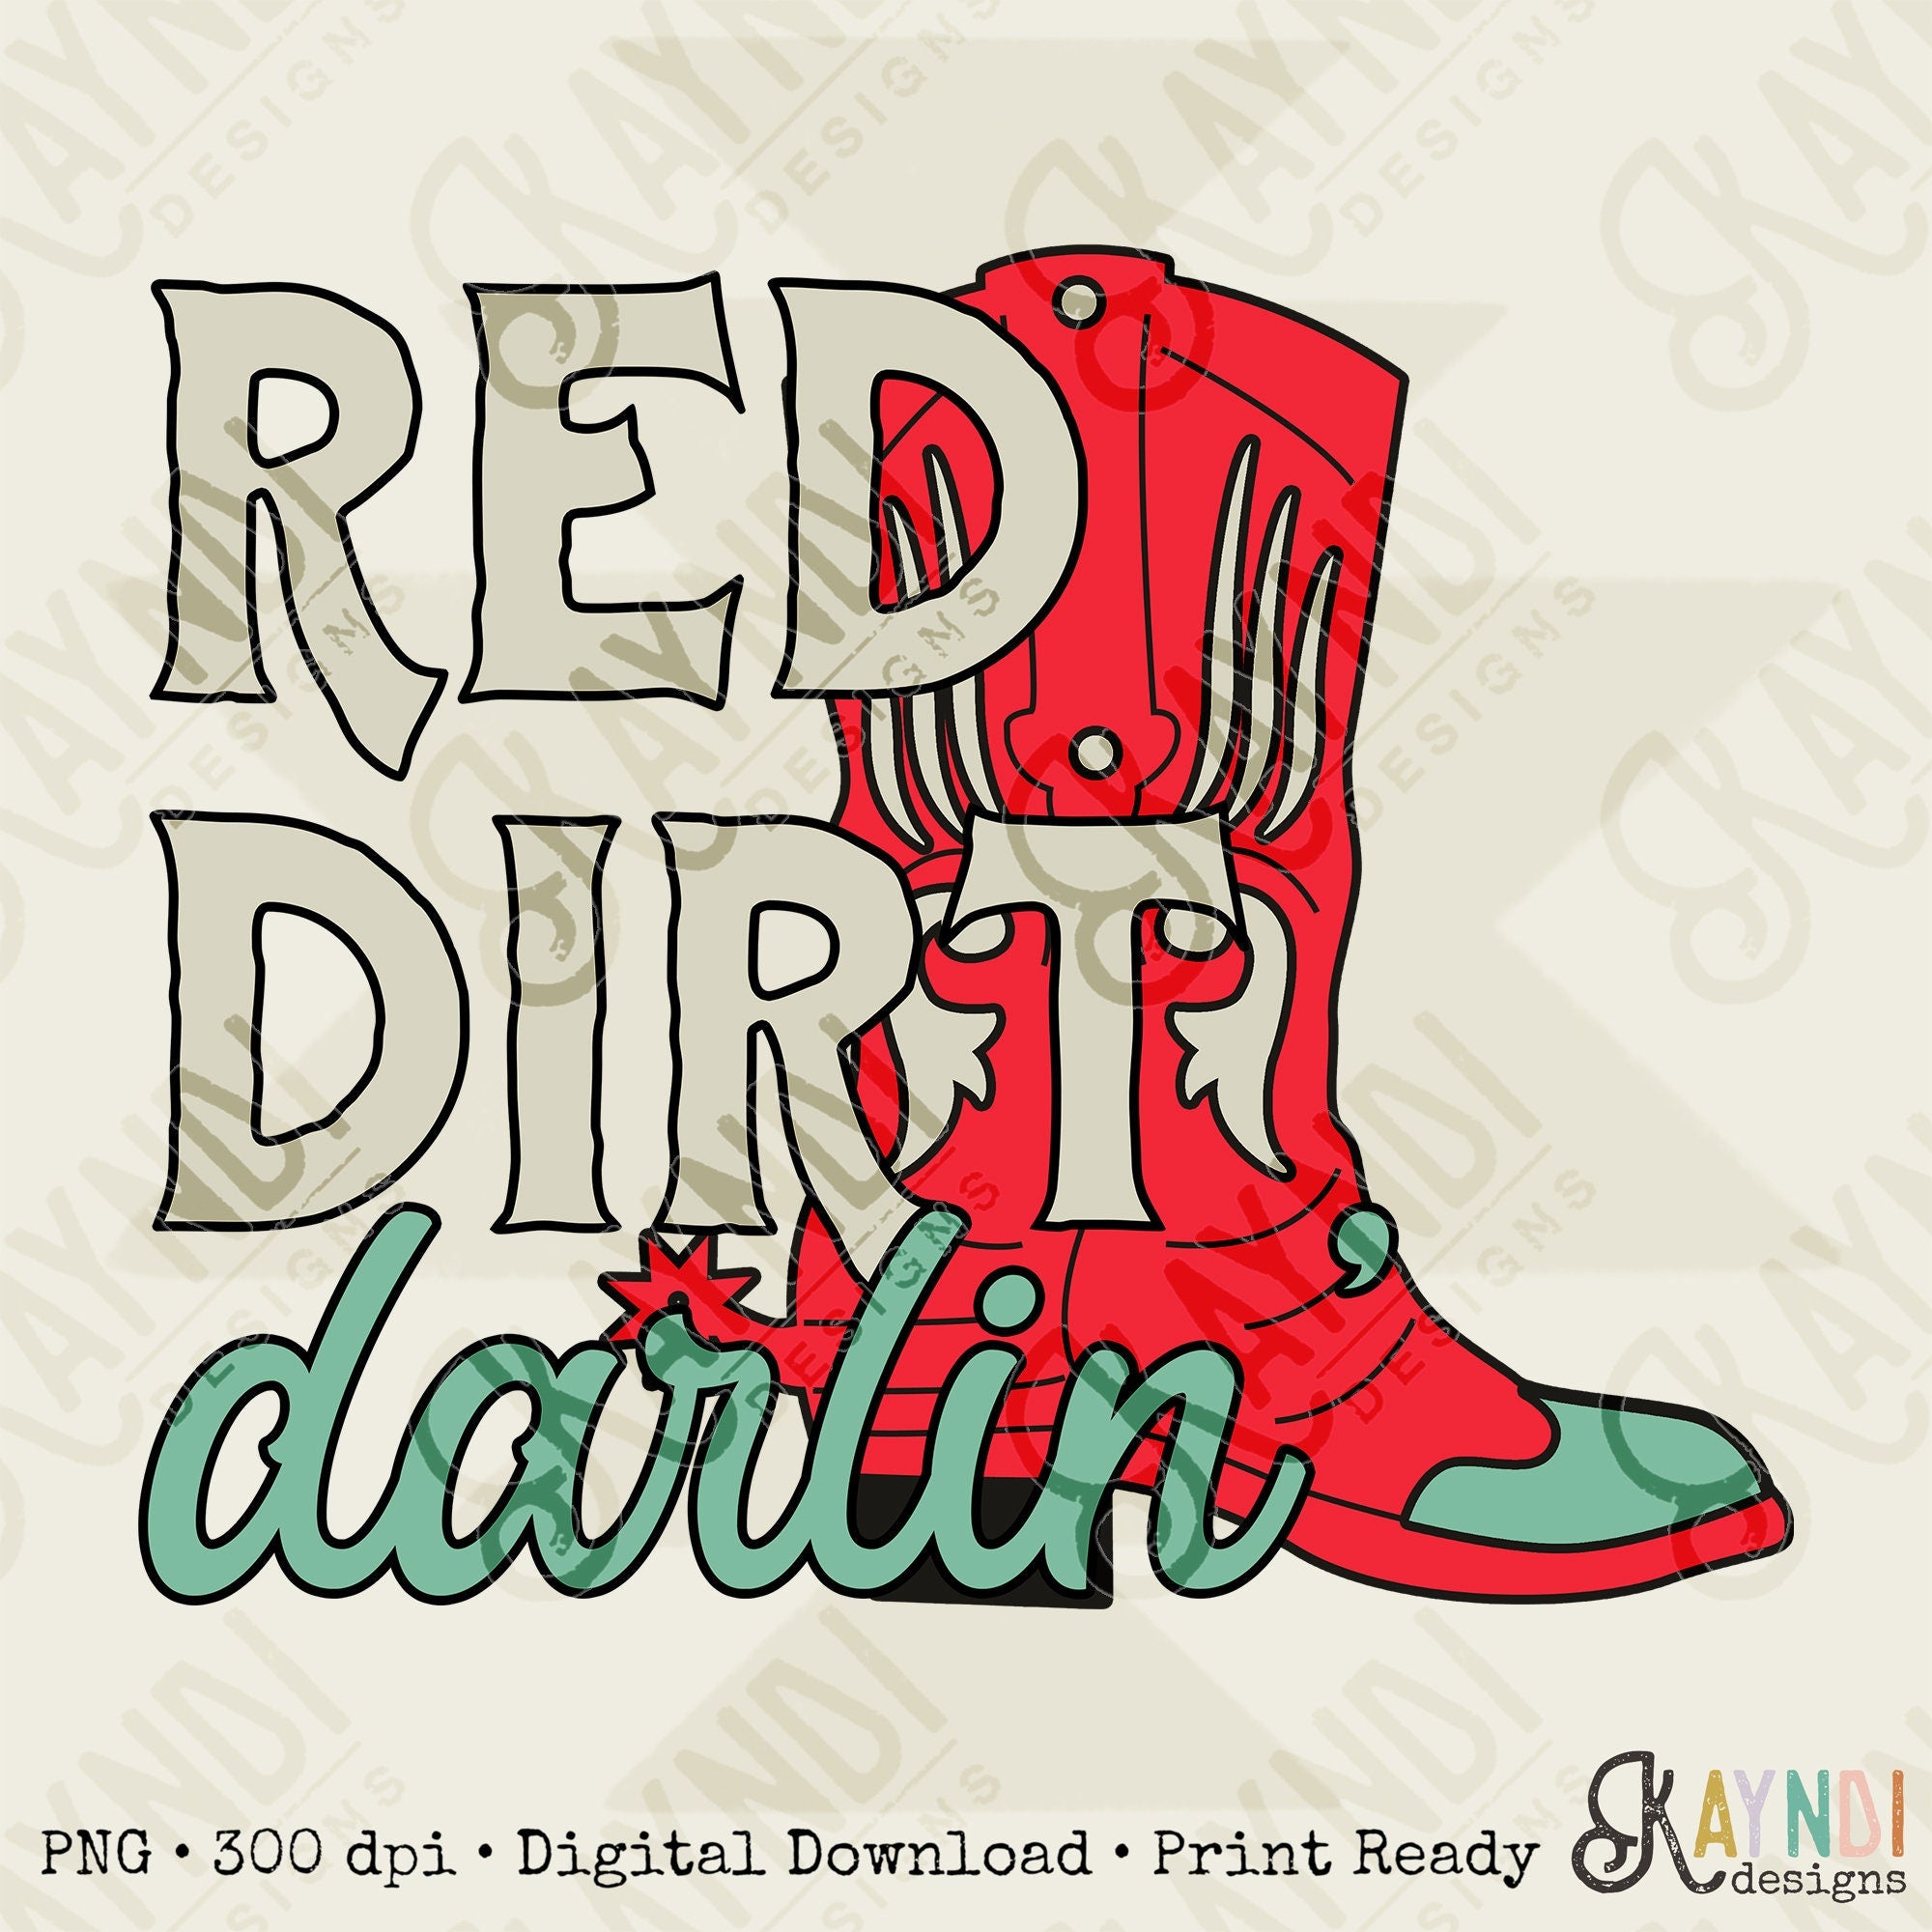 Red Dirt Darlin Sublimation Design PNG Digital Download Printable Texas Oklahoma Outlaw Country Western Southern Rock Cowgirl Boot